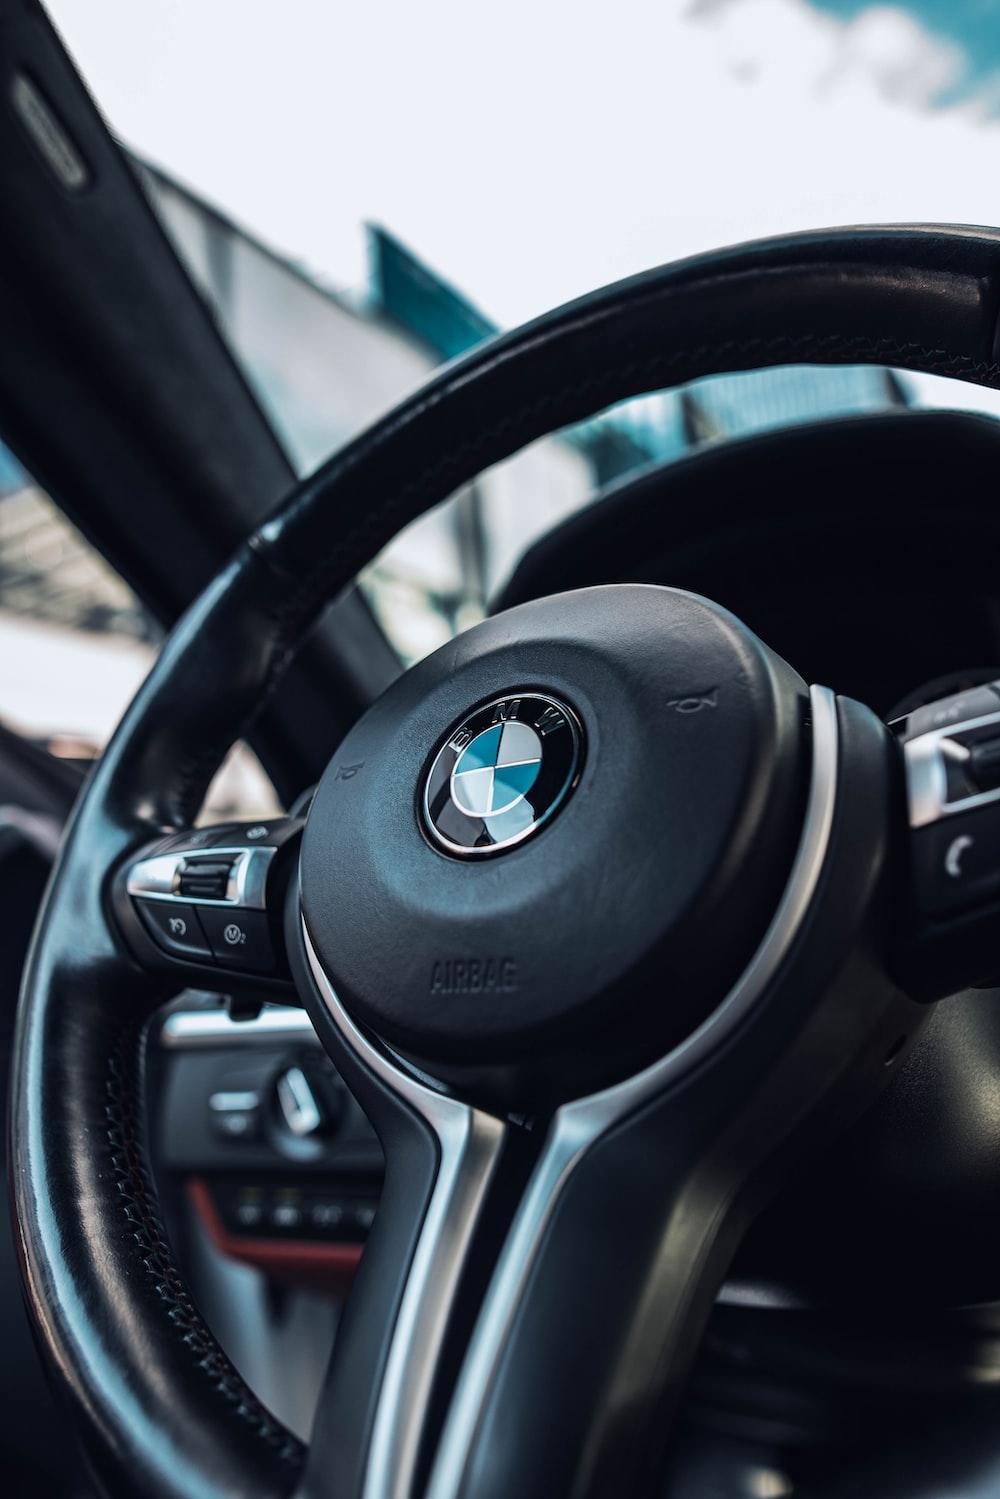 A Steering Wheel And Dashboard Of Car Photo Wheels Image